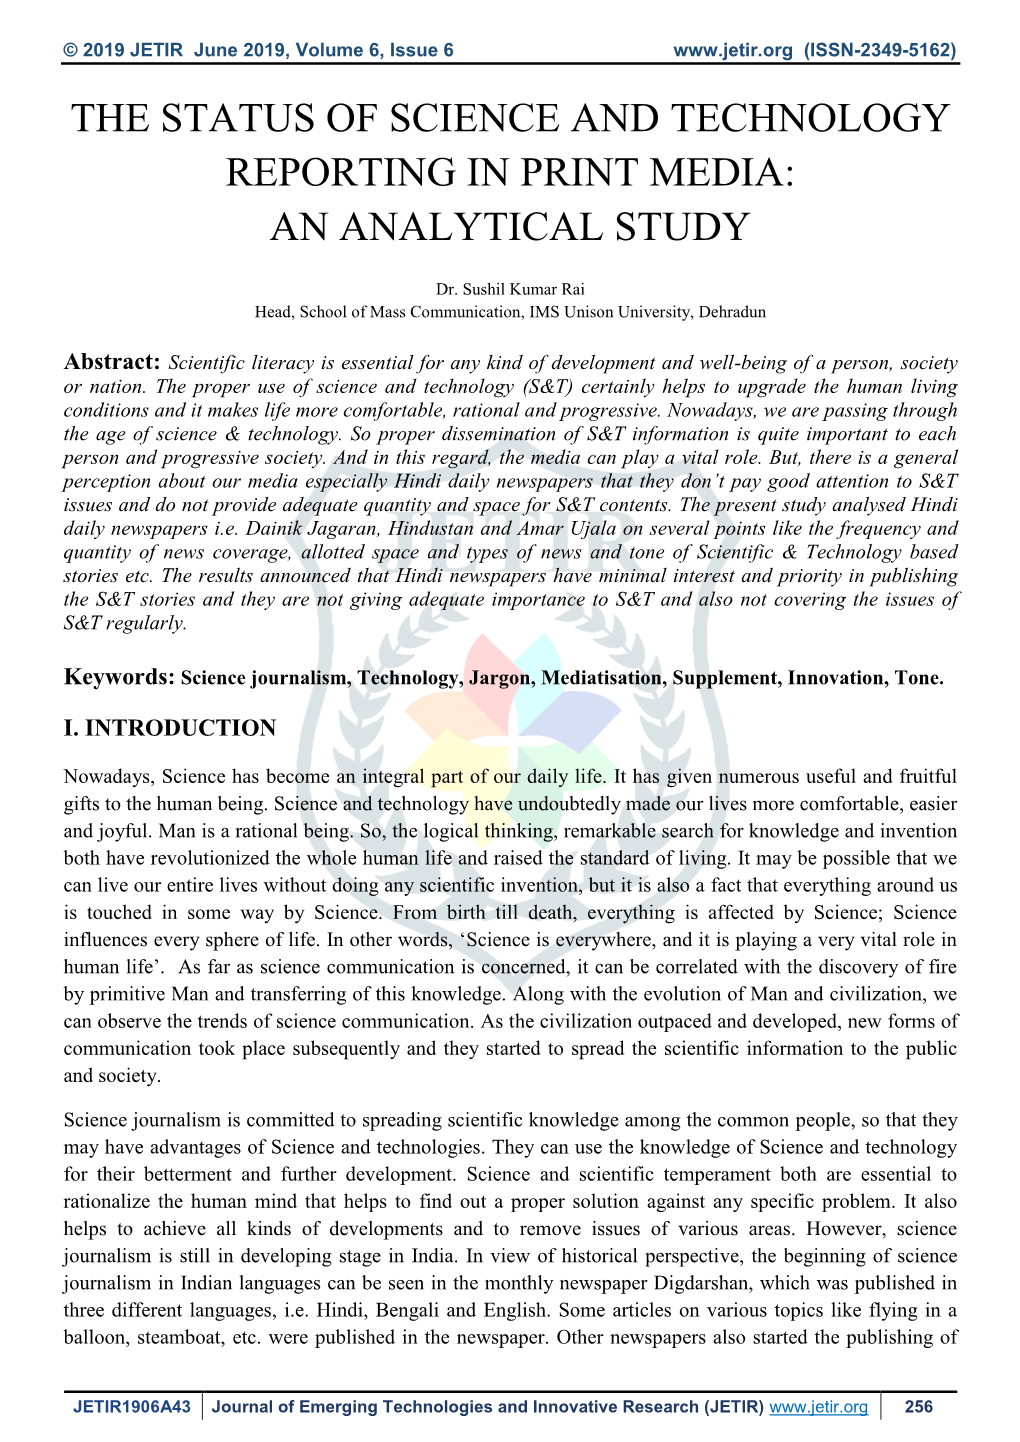 The Status of Science and Technology Reporting in Print Media: an Analytical Study